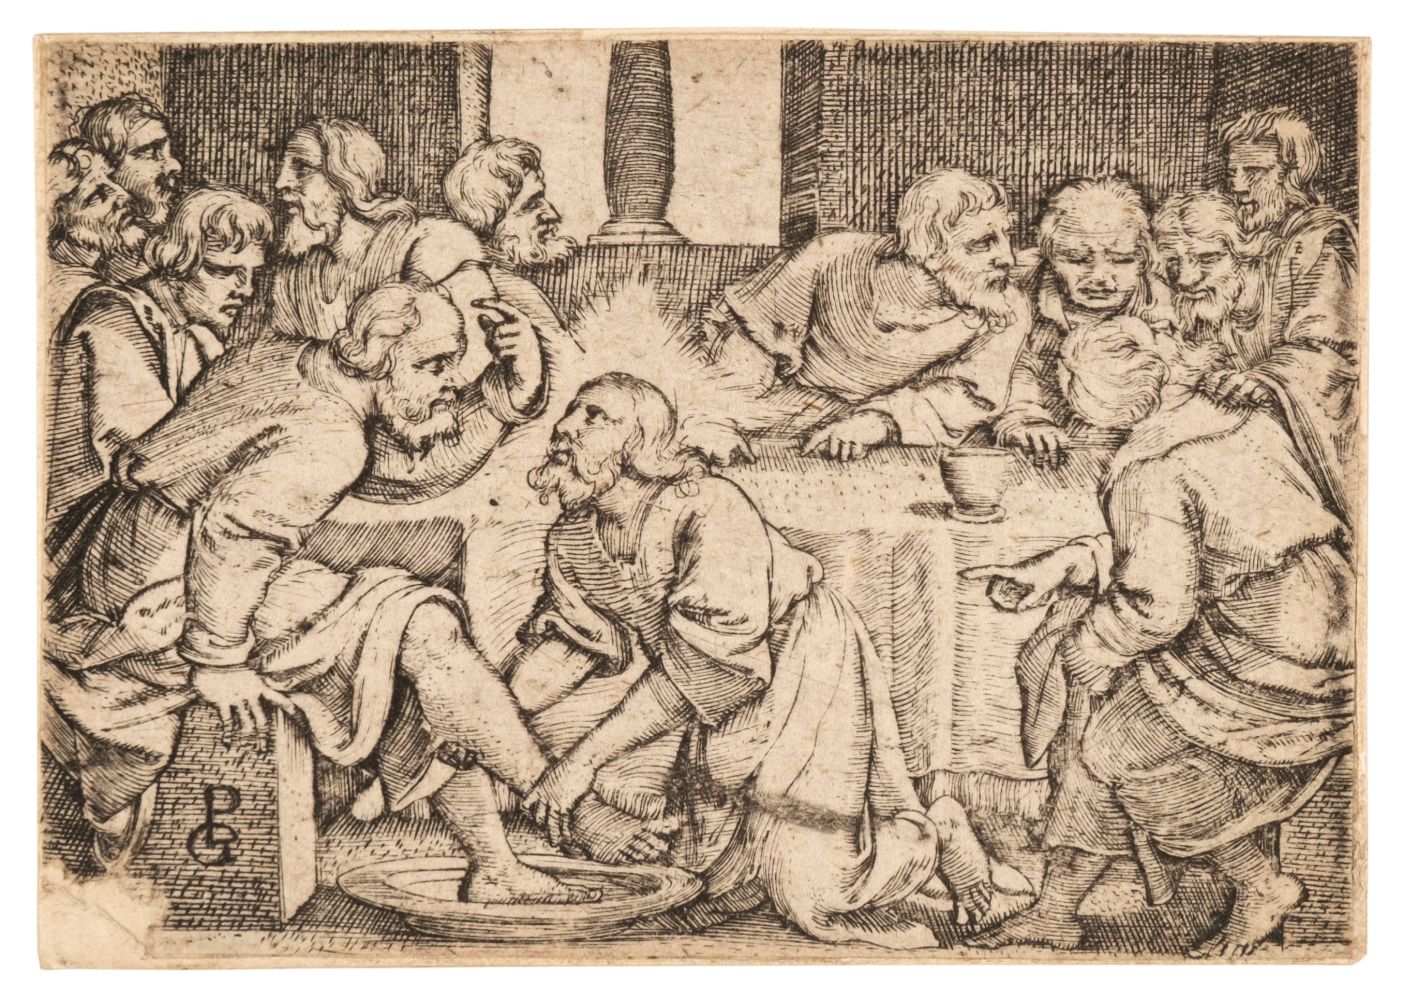 Pencz (G., c. 1500-1550). Christ washing the Disciples’ Feet, 1534, engraving, and 9 others